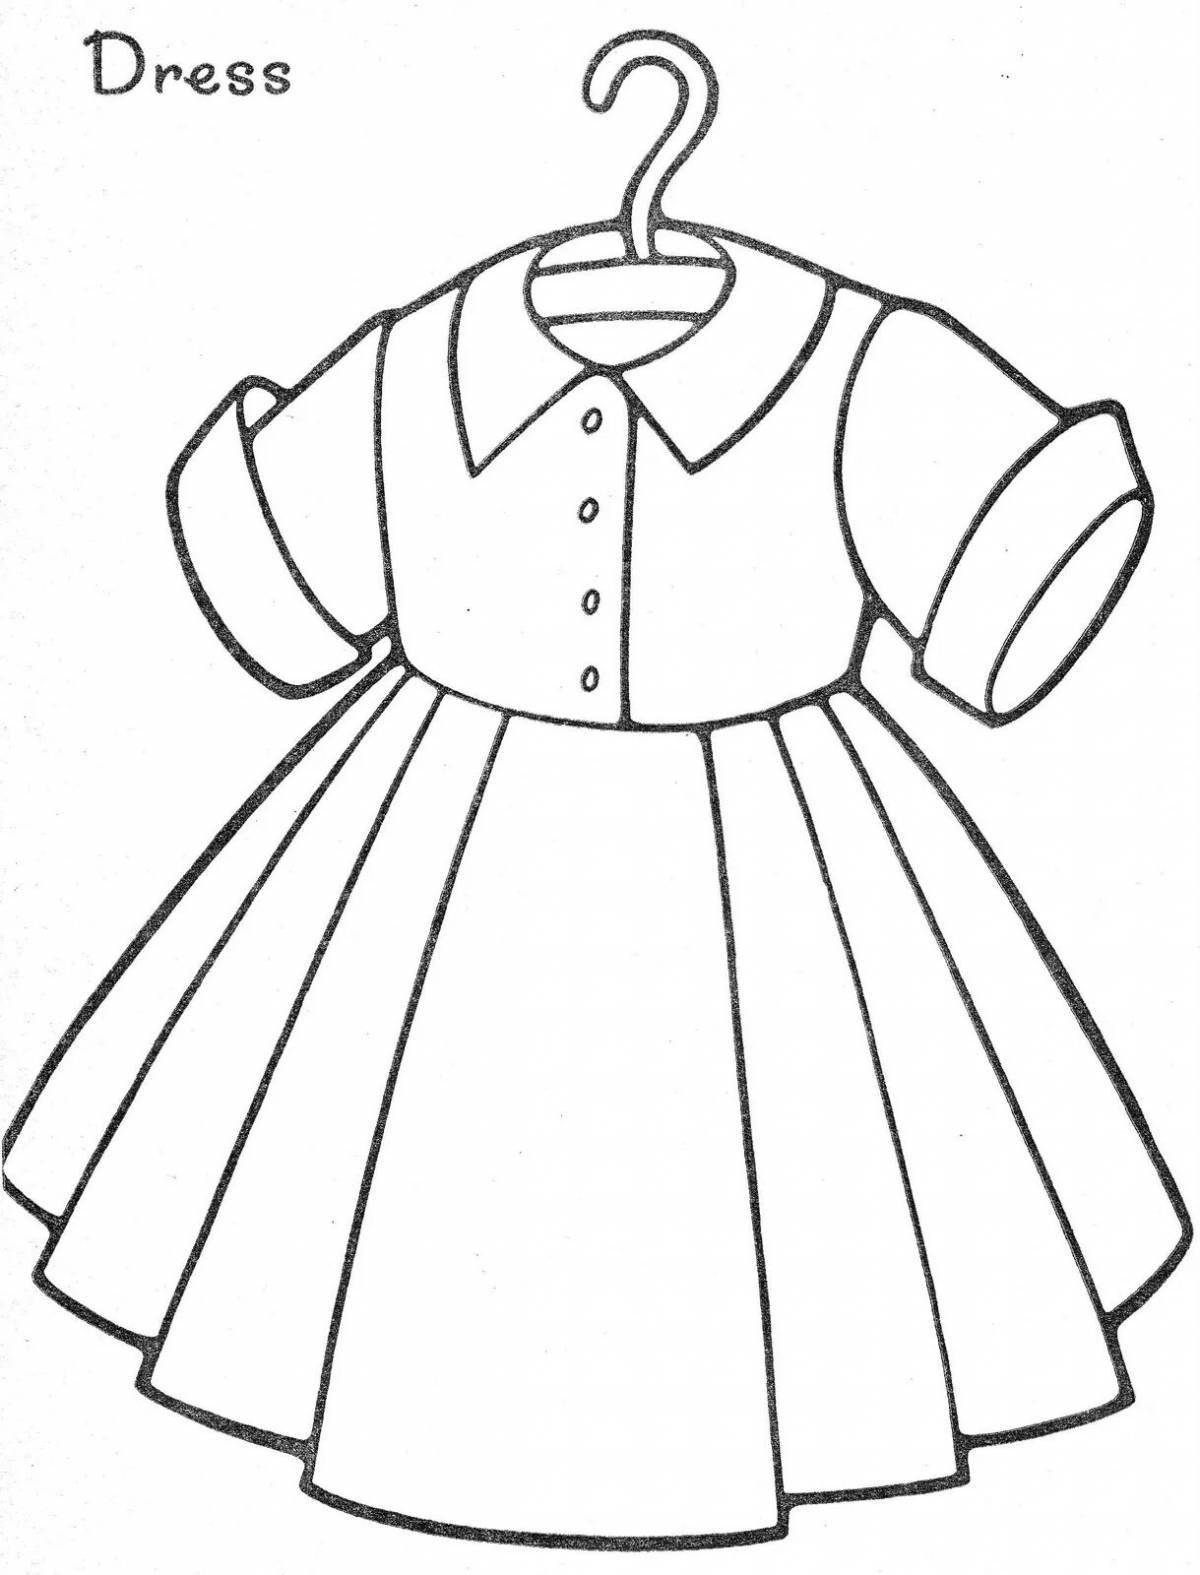 Coloring page with colorful dress pattern